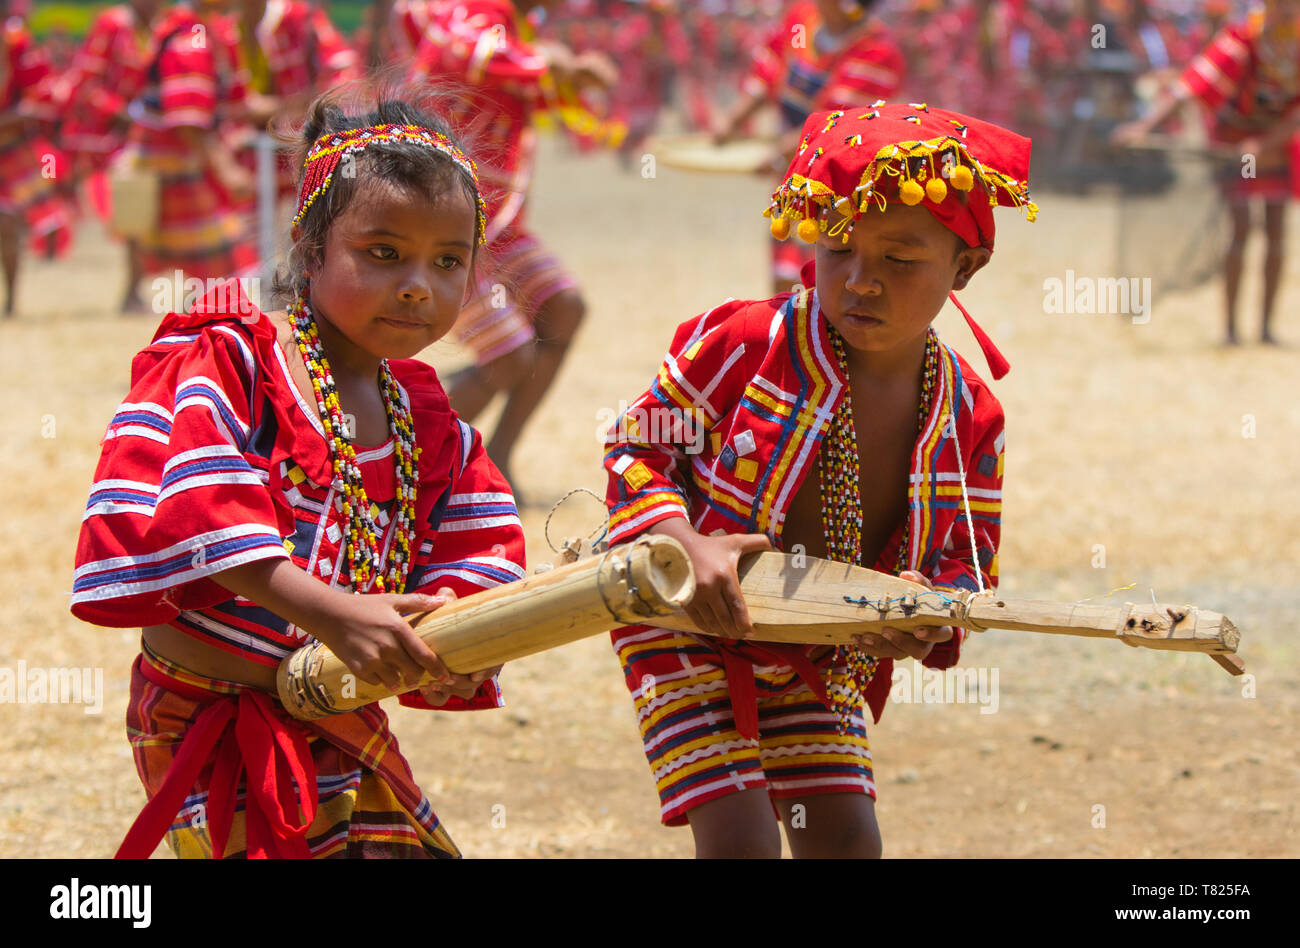 Kaamulan is a month long ethnic festival held annually in the Province